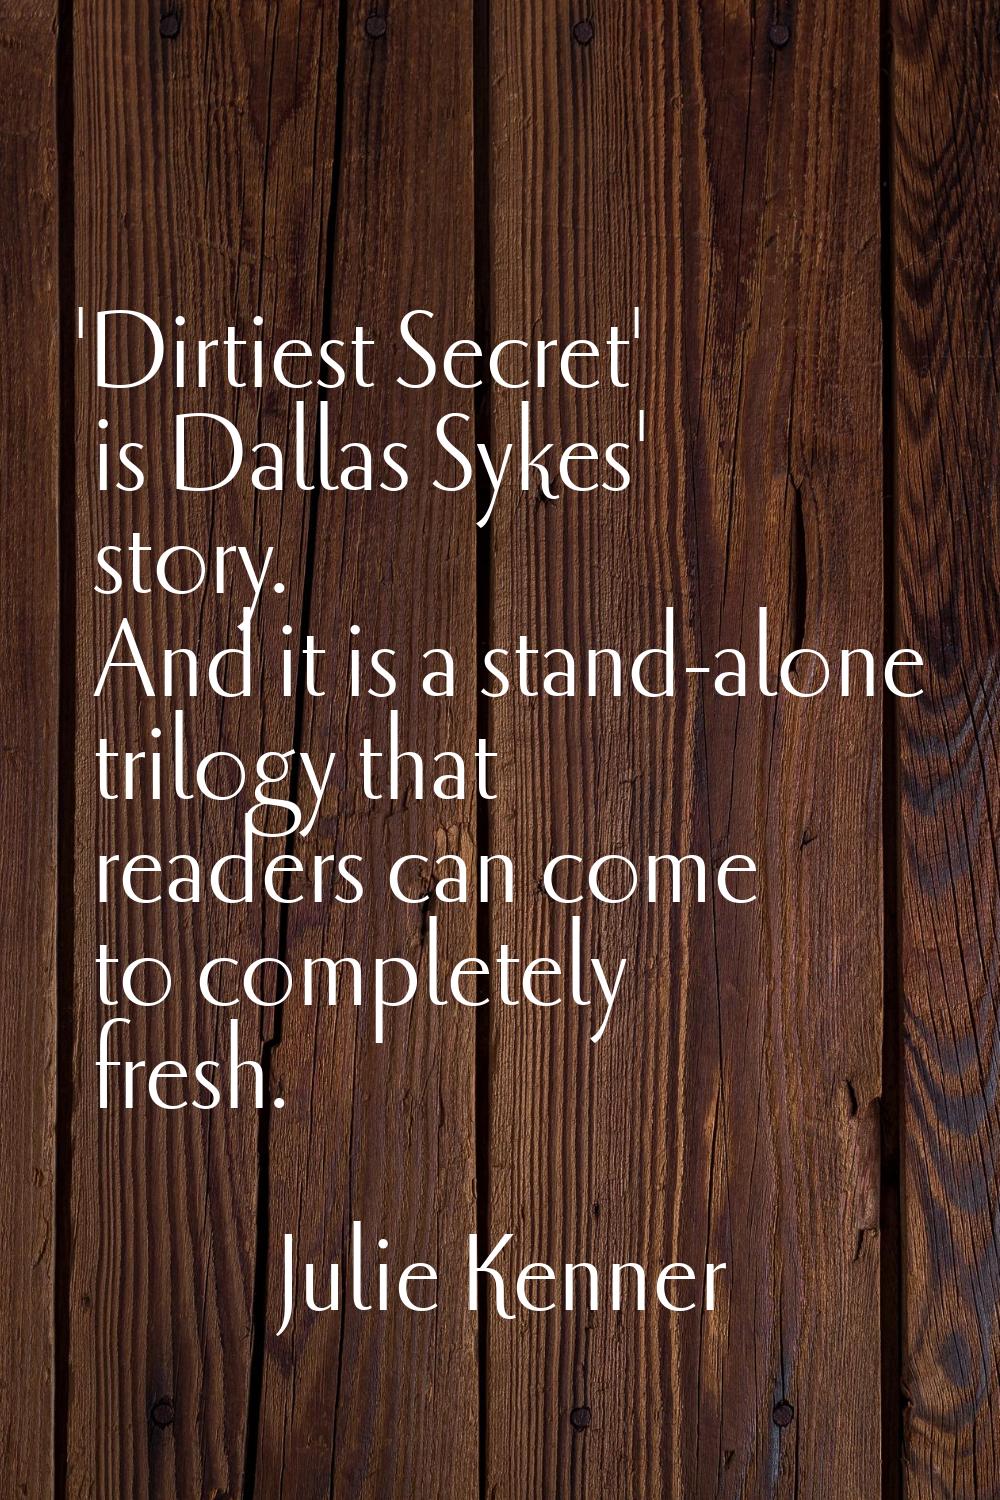 'Dirtiest Secret' is Dallas Sykes' story. And it is a stand-alone trilogy that readers can come to 